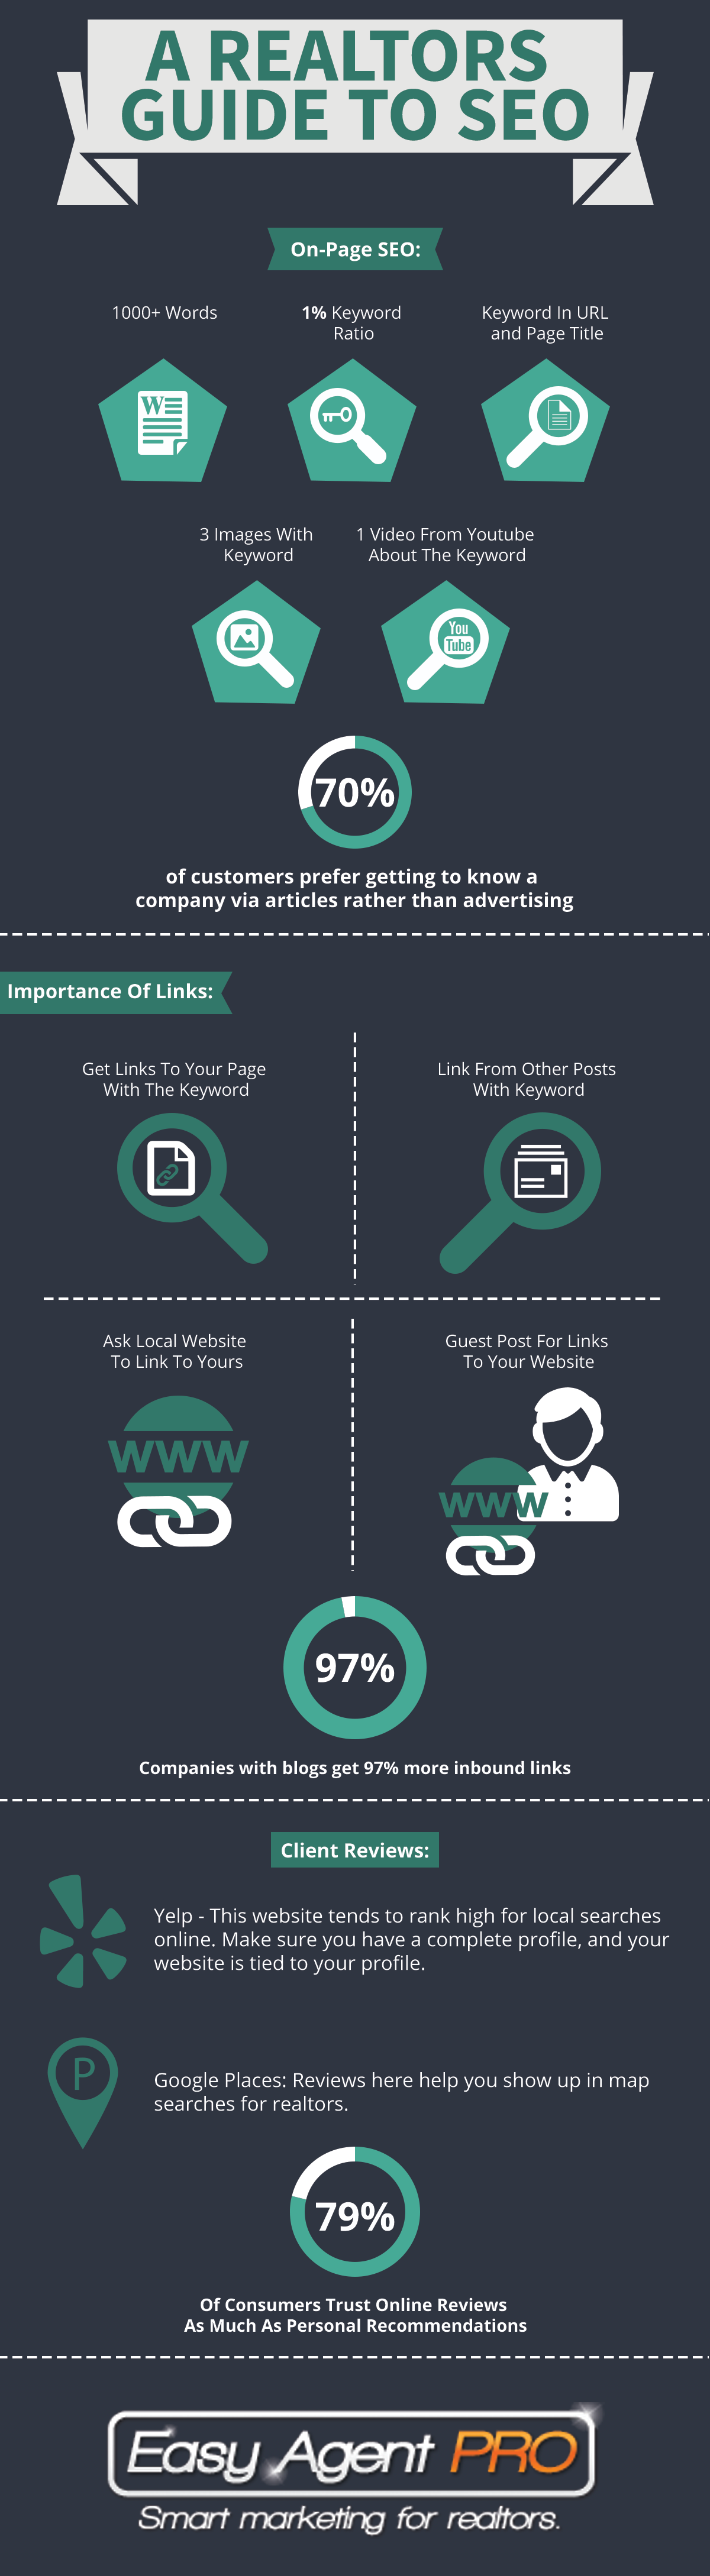 Real Estate Agent SEO Infographic